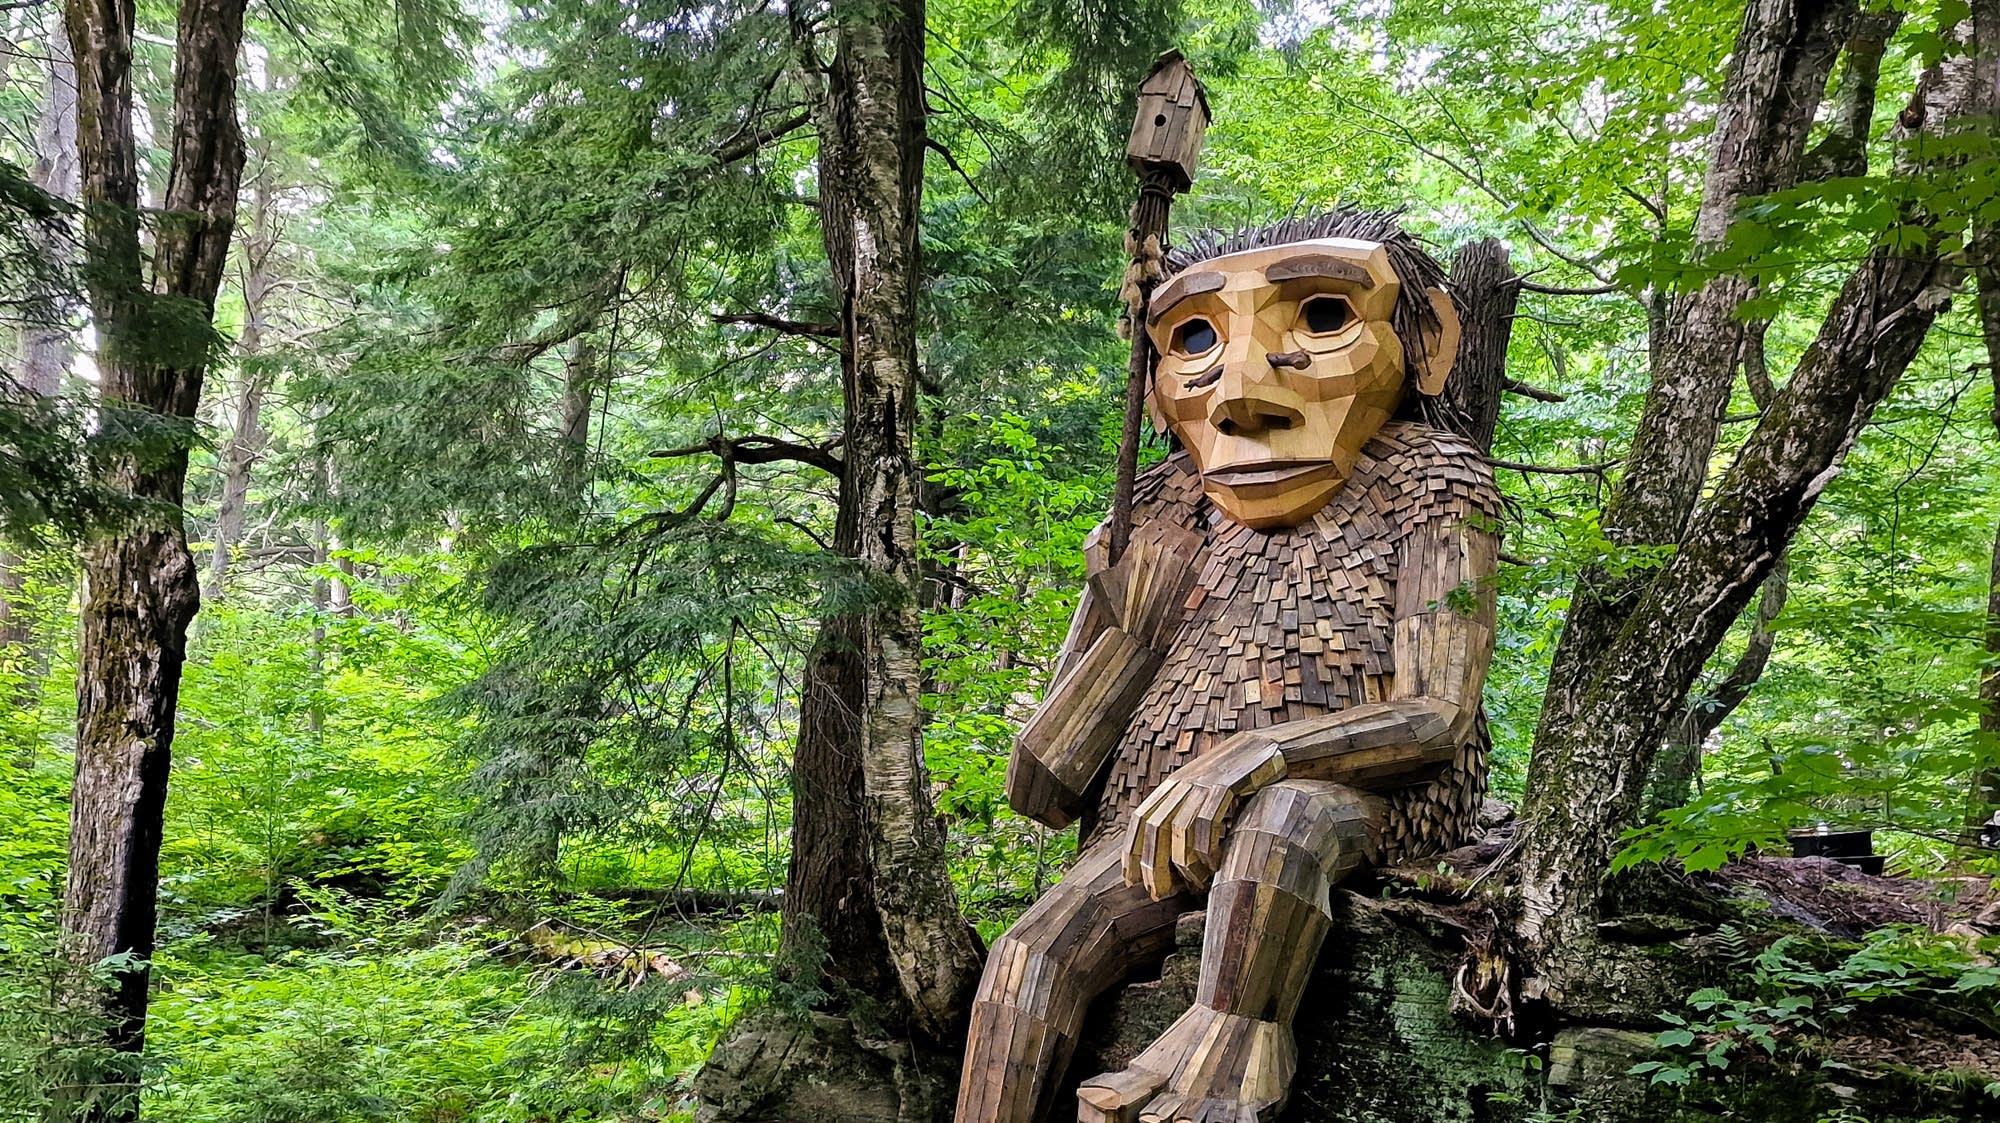 Trolls in the northern Minnesota woods with a message